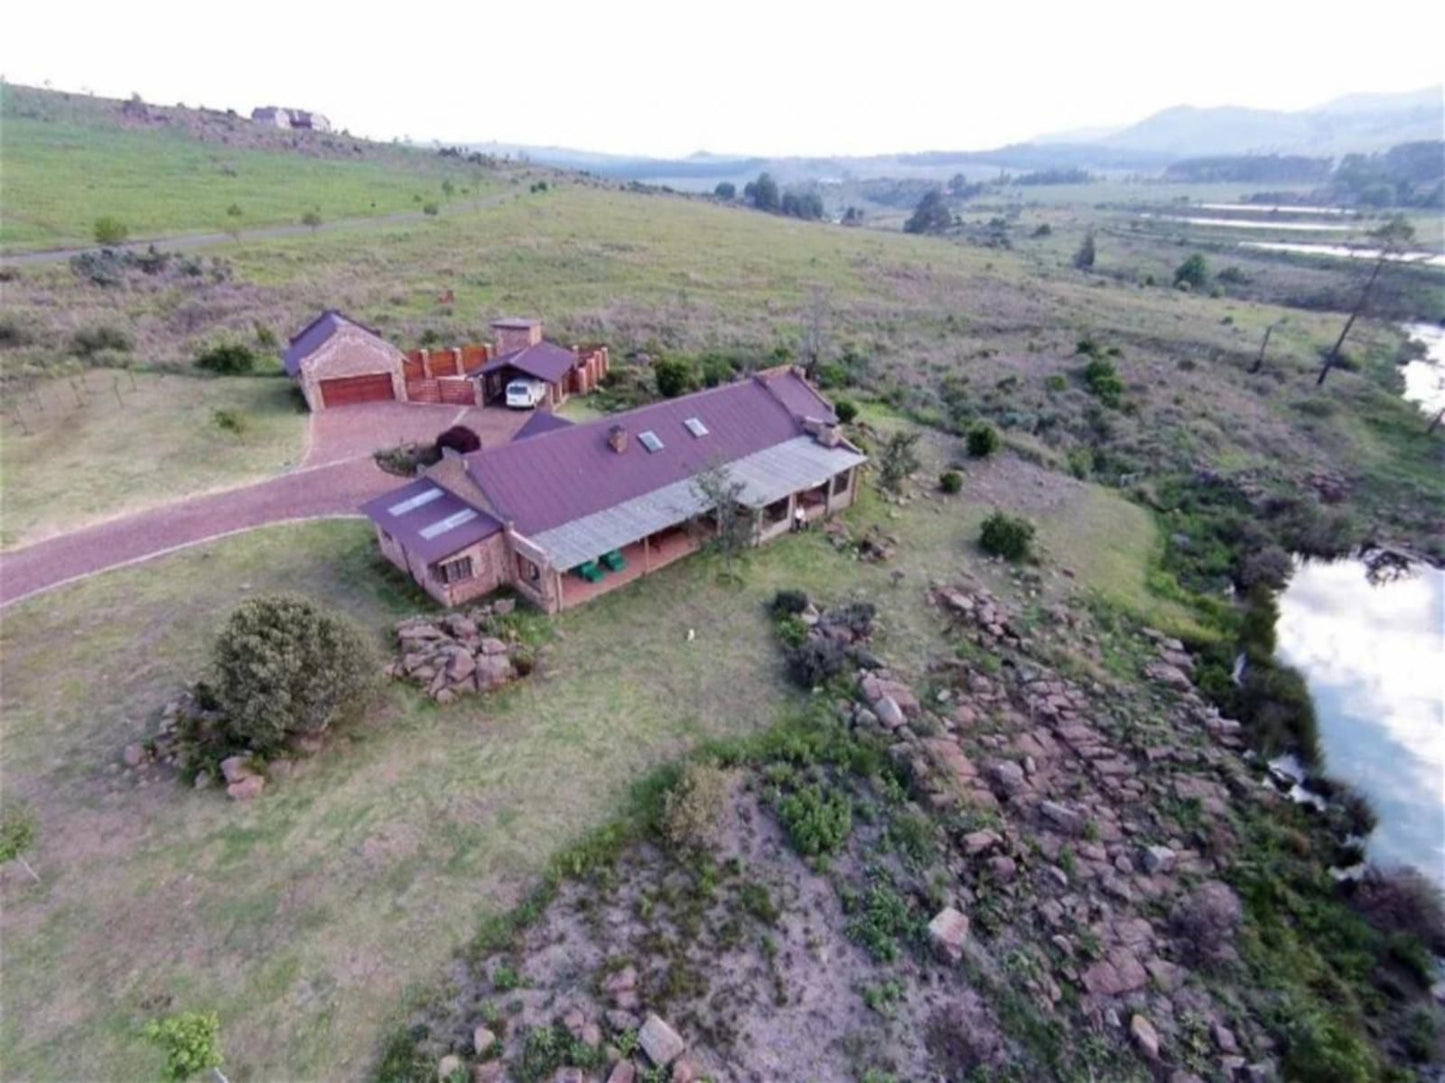 Willow Weir Cottage Dullstroom Mpumalanga South Africa Unsaturated, Building, Architecture, Aerial Photography, Highland, Nature